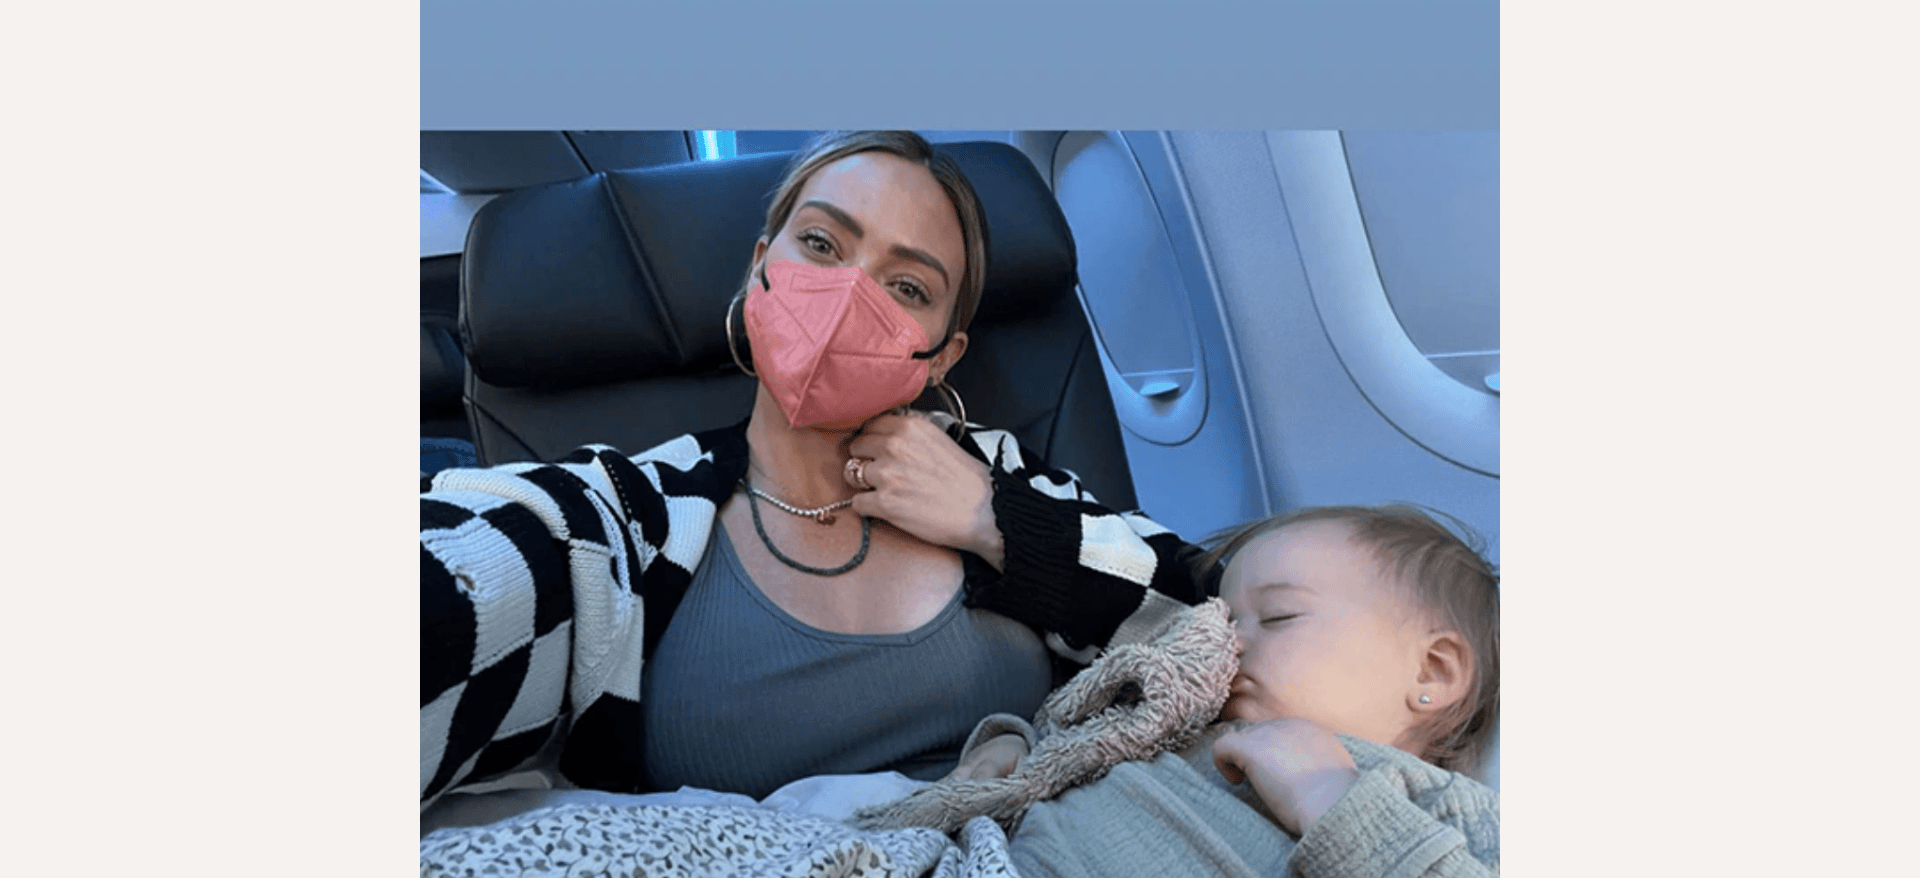 Hilary Duff on airplane with daughter